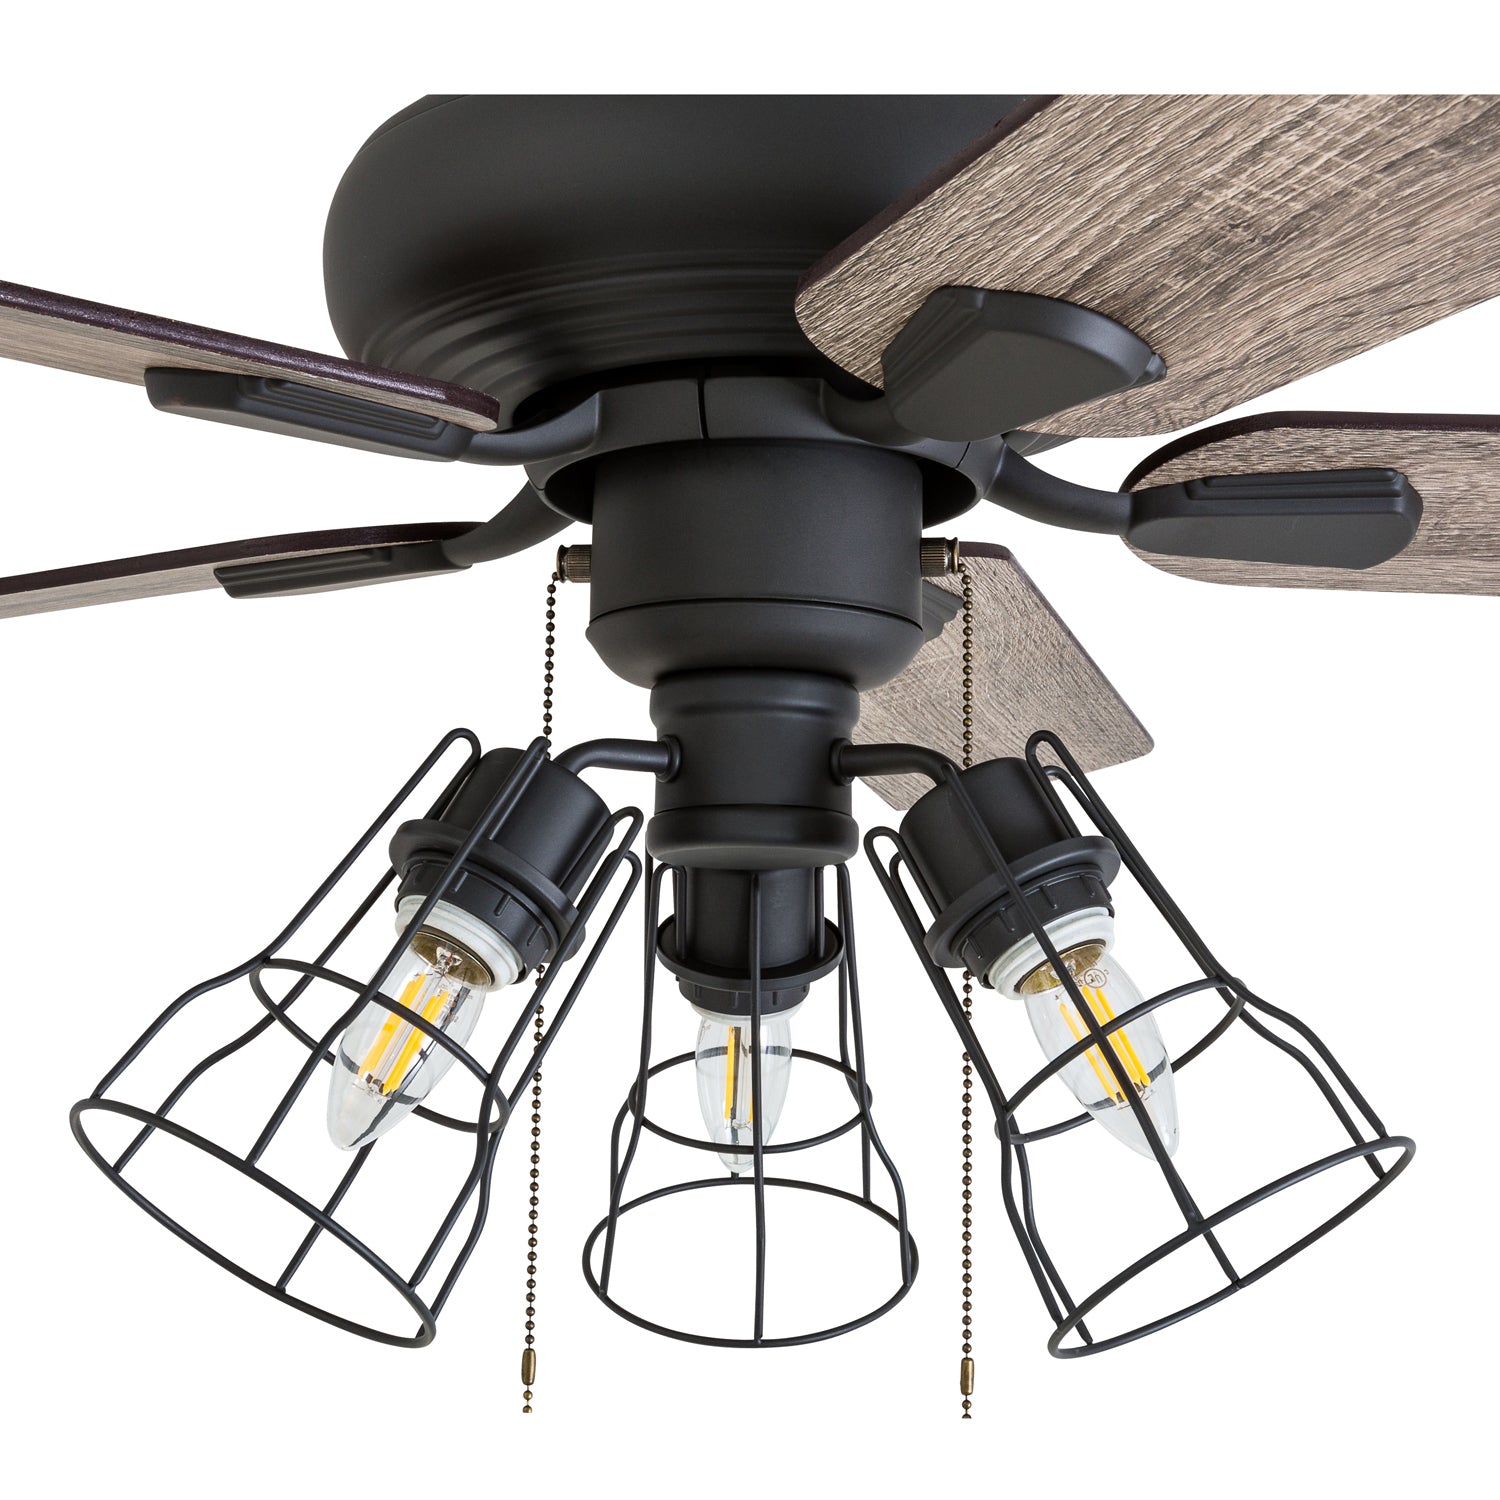 42 Inch Madison County, Bronze, Remote Control, Ceiling Fan by Prominence Home